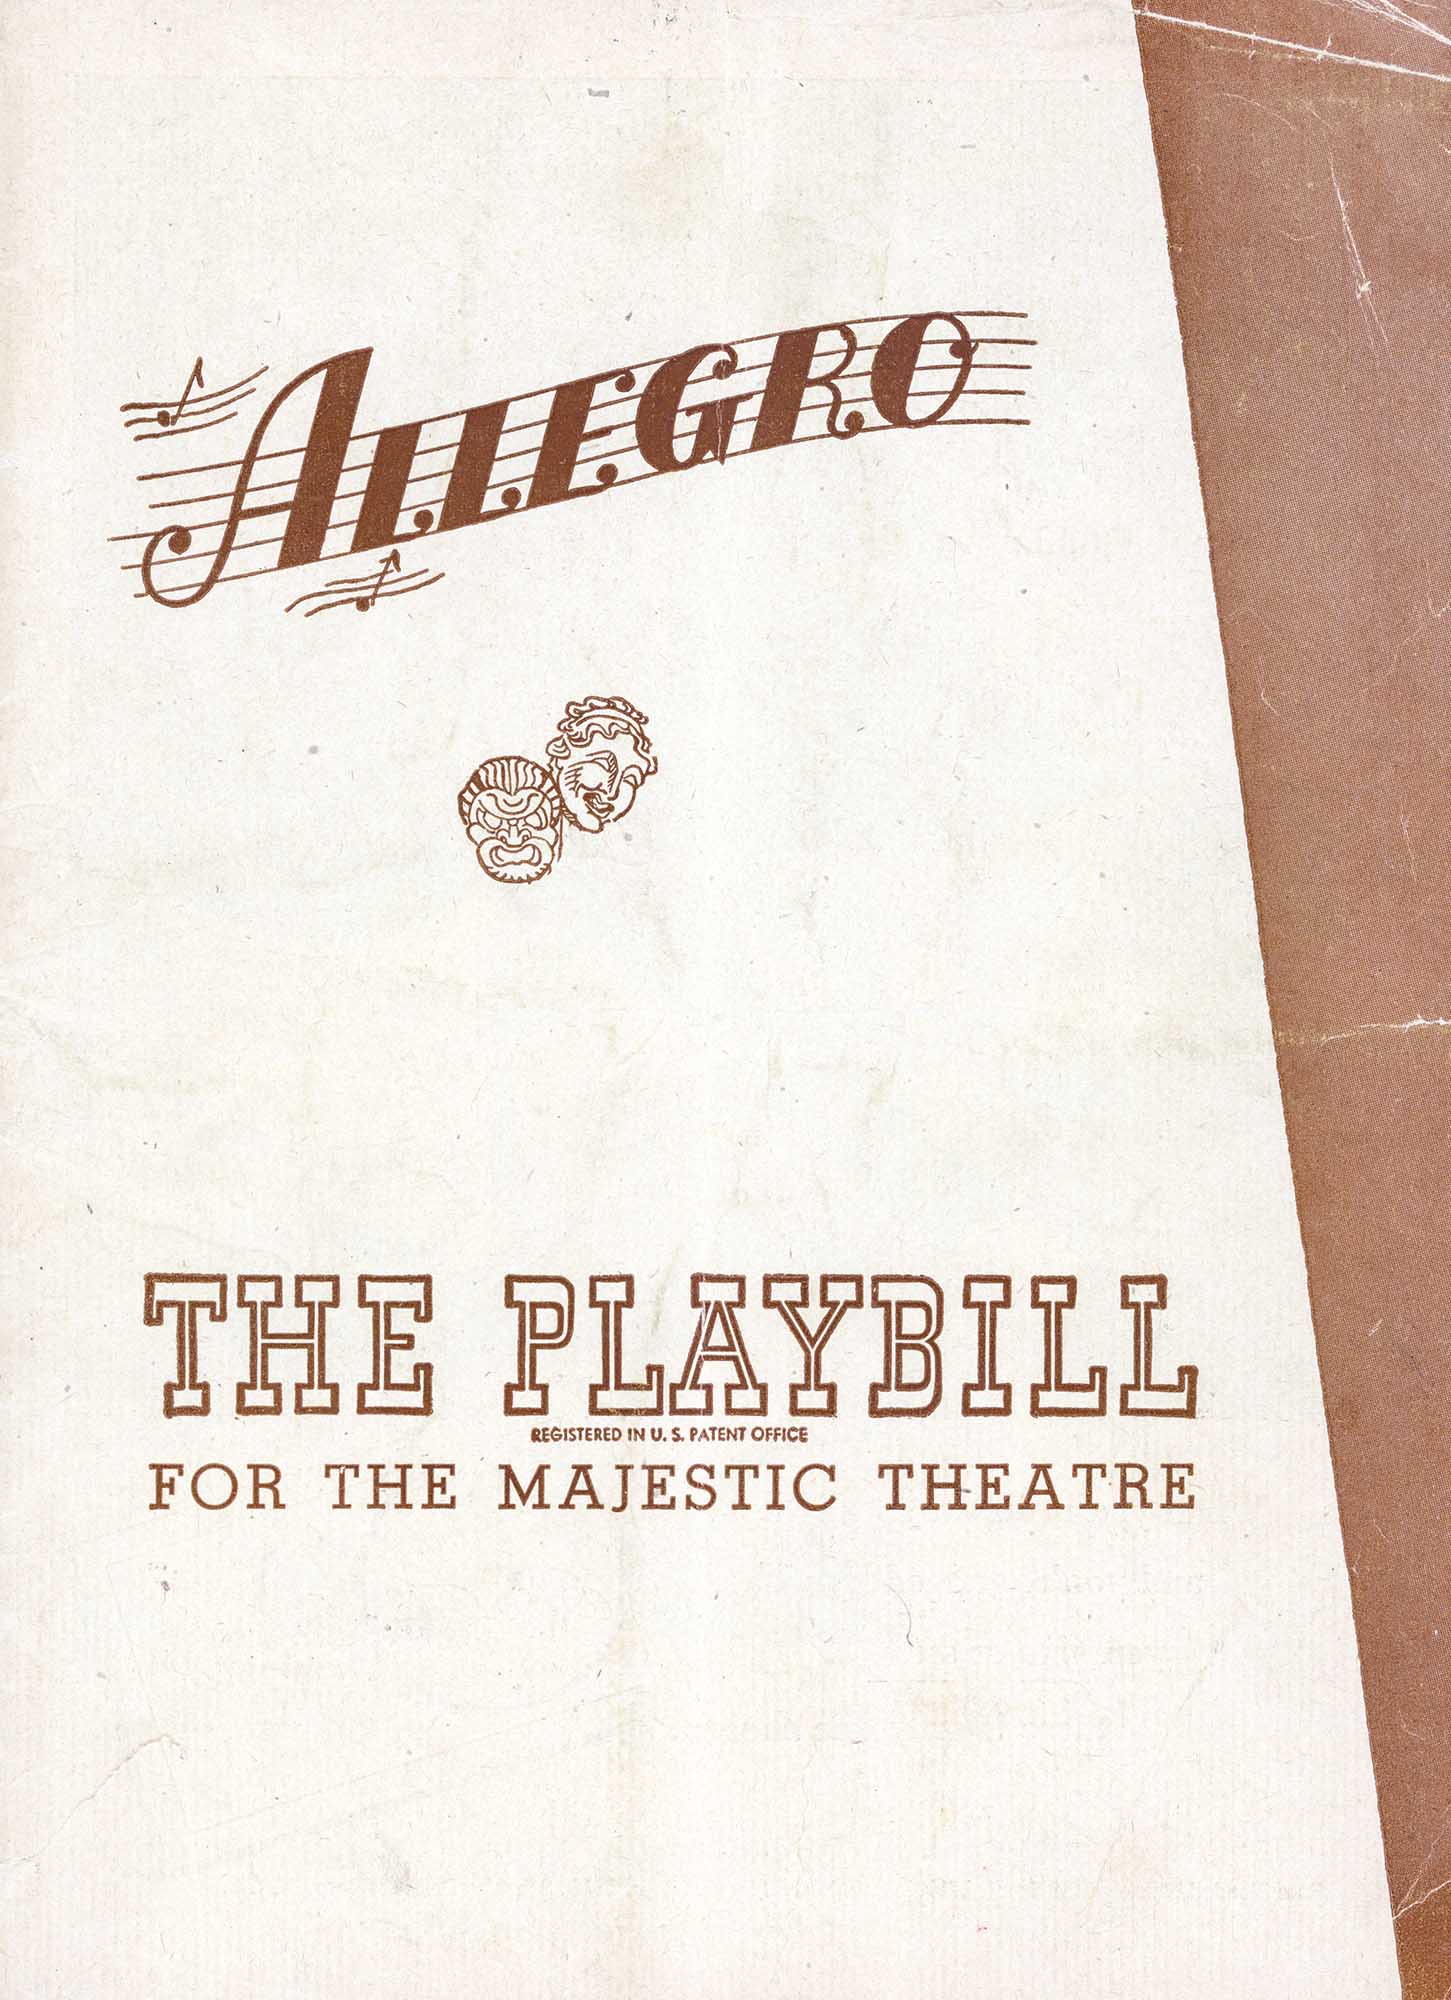 Playbill cover from the 1947 Broadway production of Allegro.